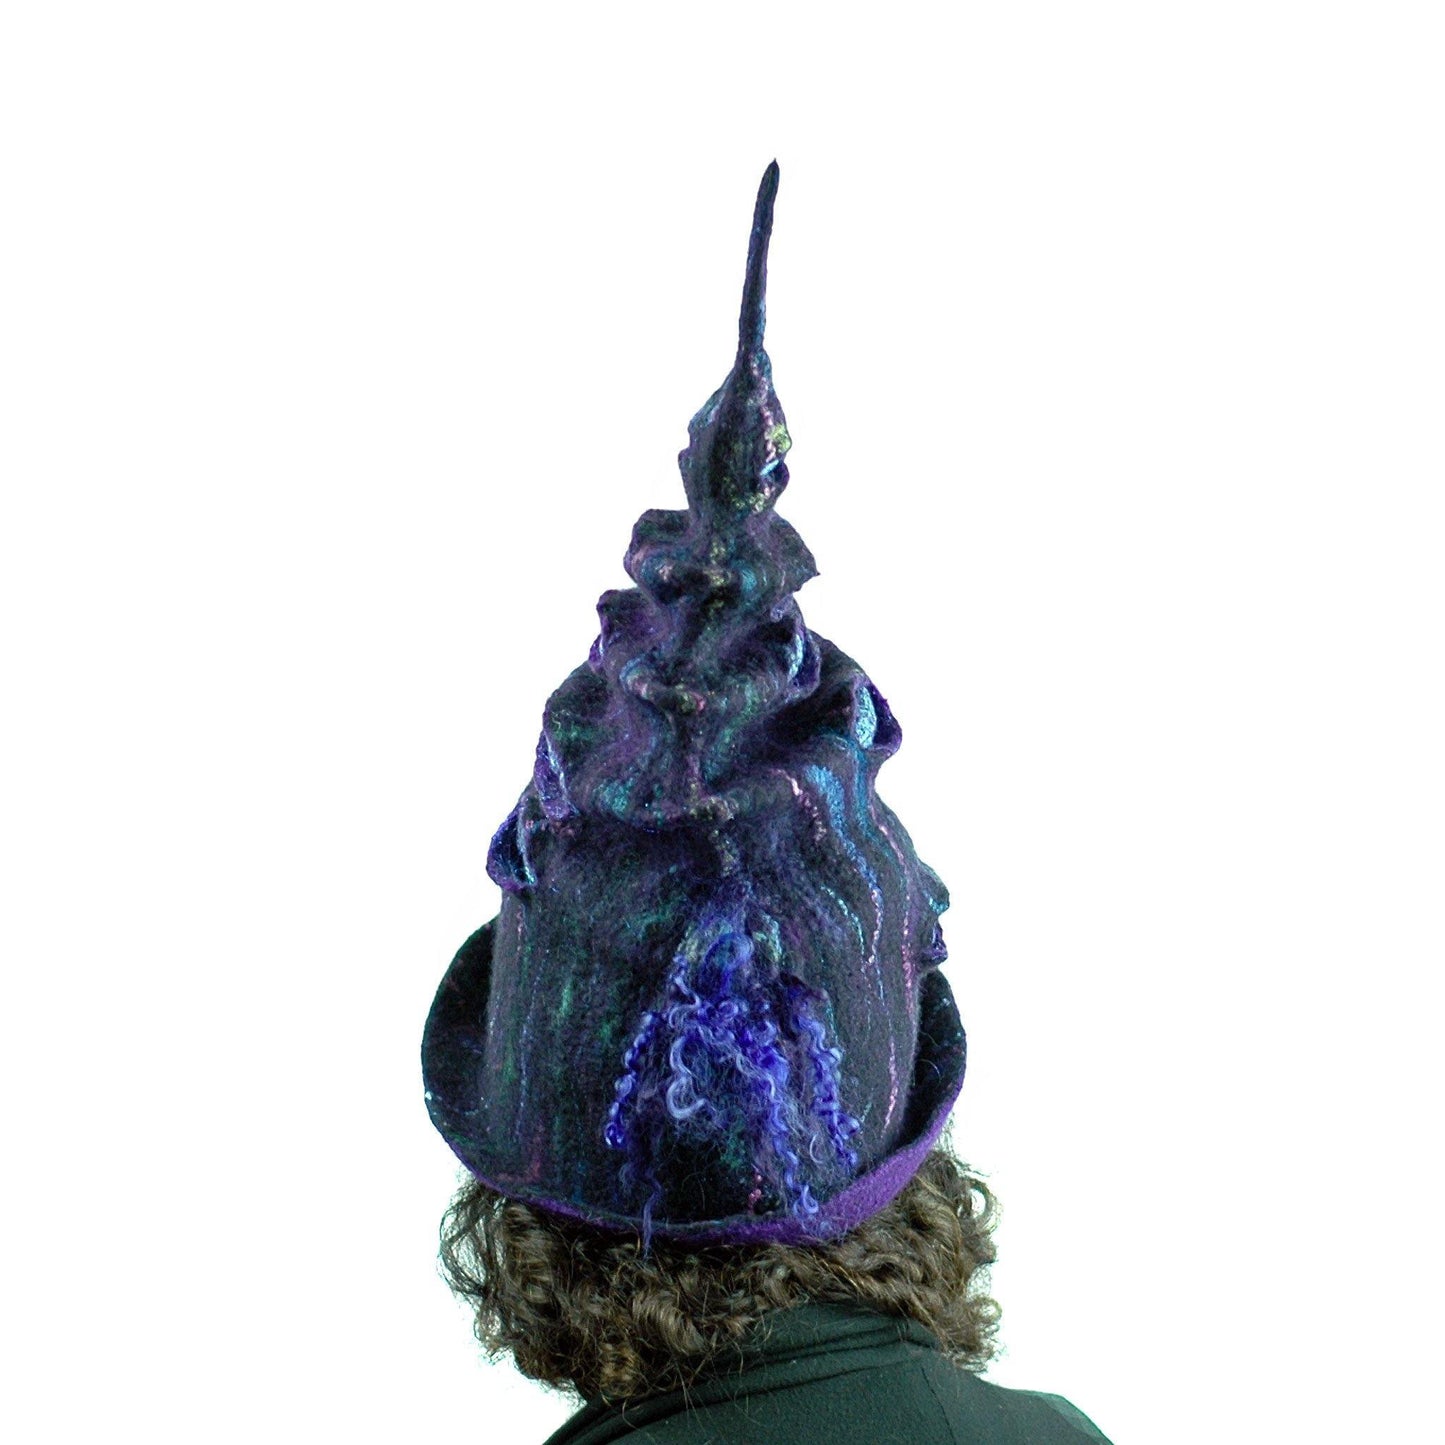 Dark Purple, Tall Felted Hat in the Shape of a Unicorn Horn - back view